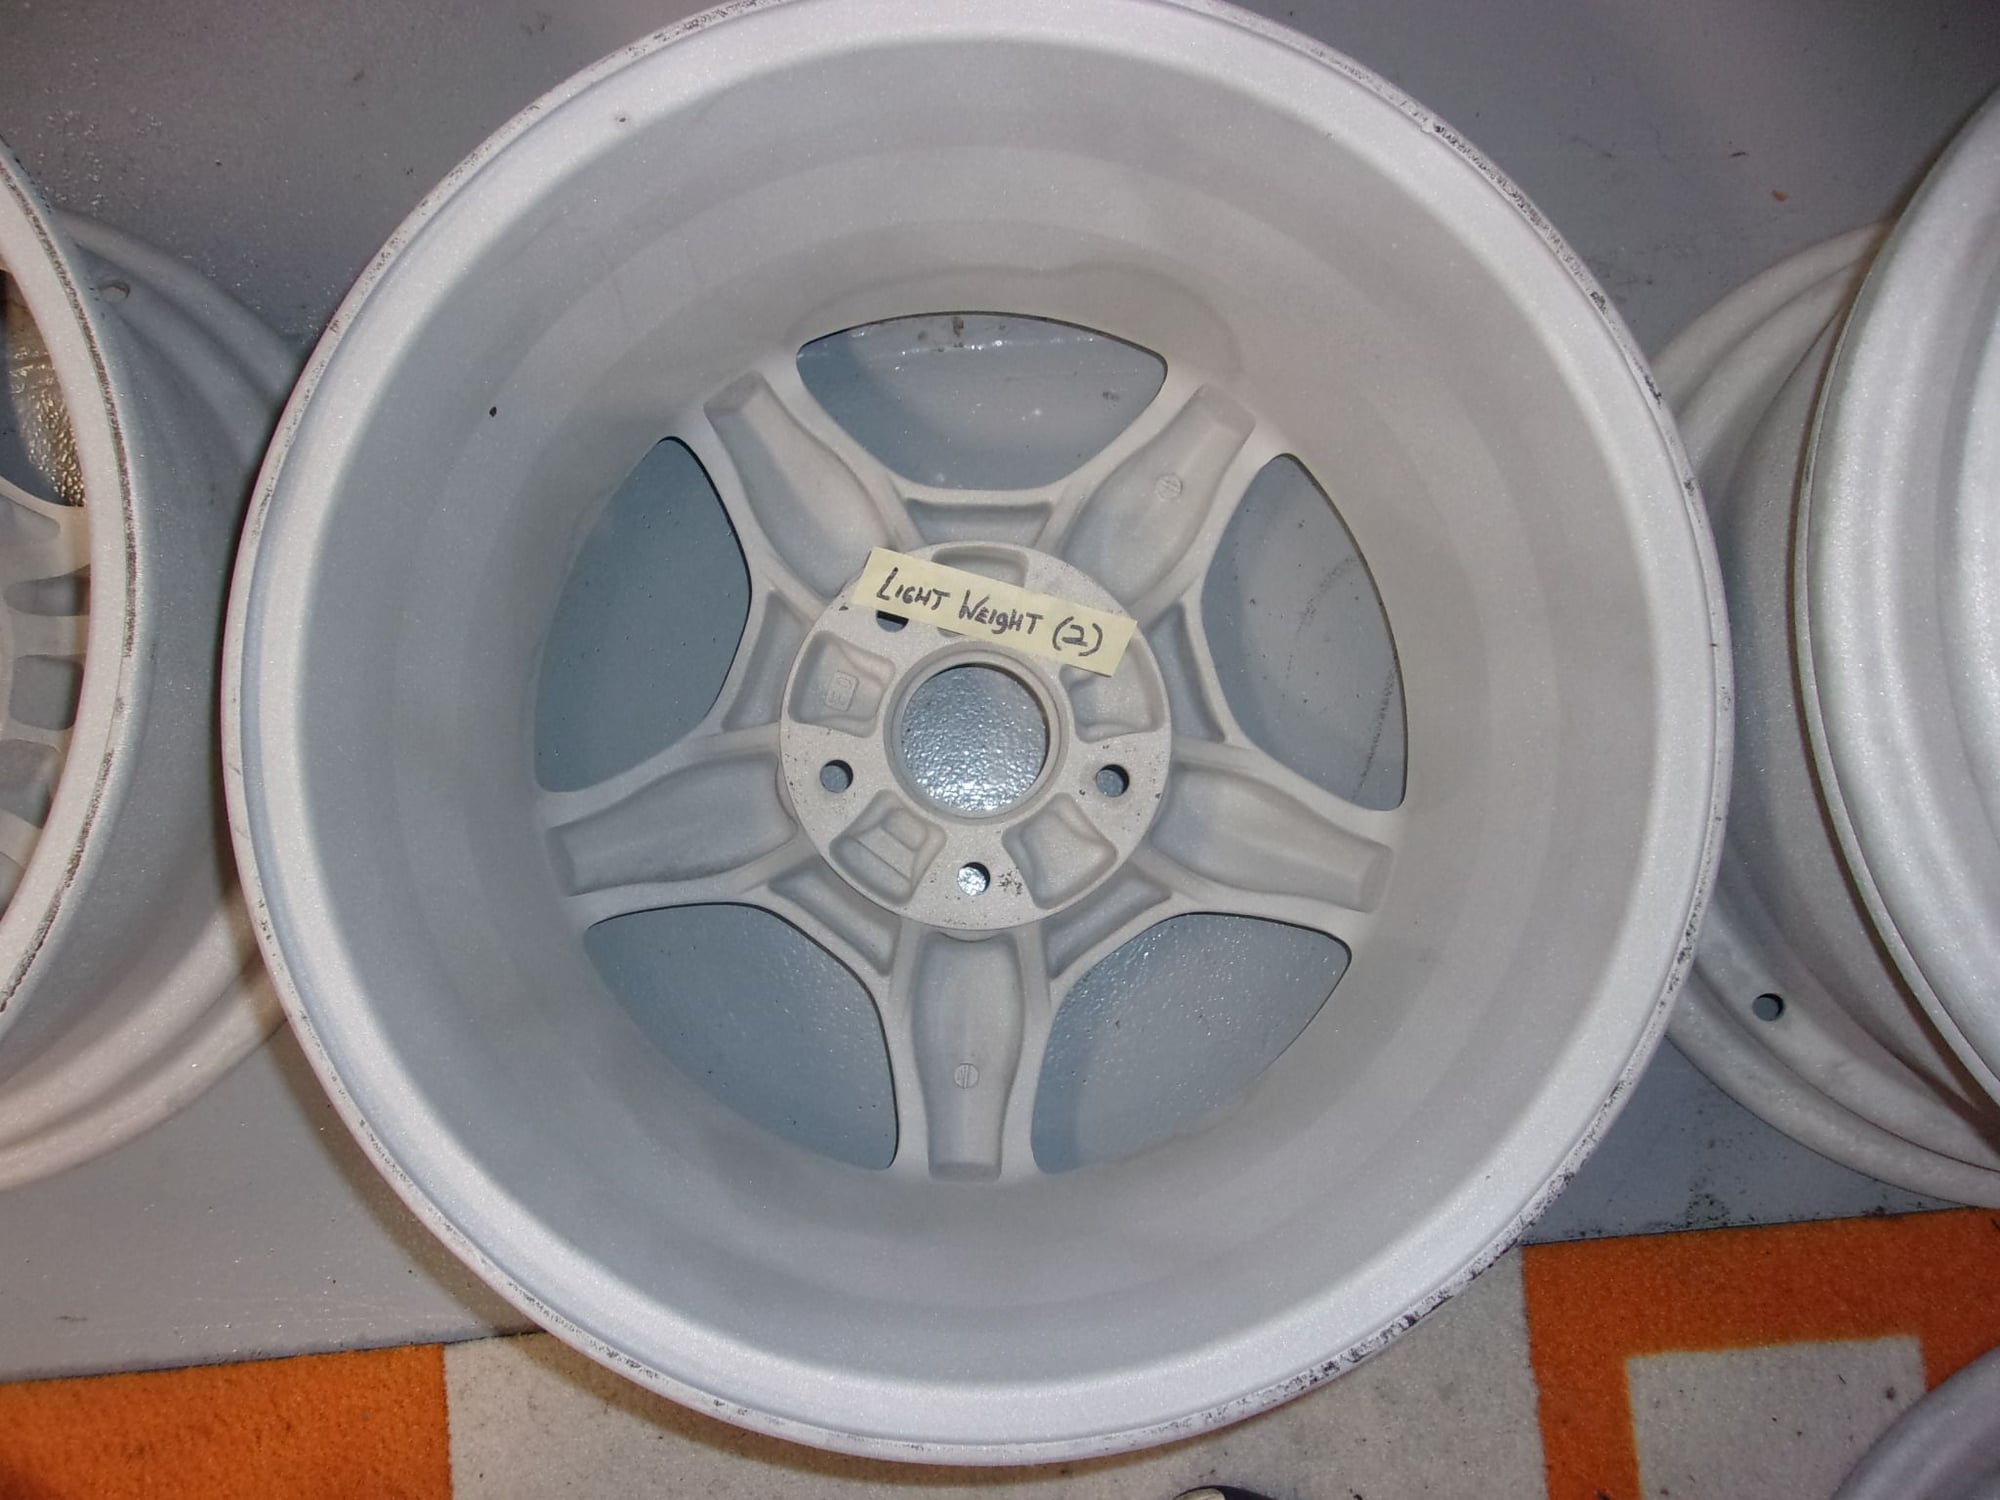 Wheels and Tires/Axles - OEM Wheels - Used - 1993 to 1994 Mazda RX-7 - Murfreesboro, TN 37130, United States